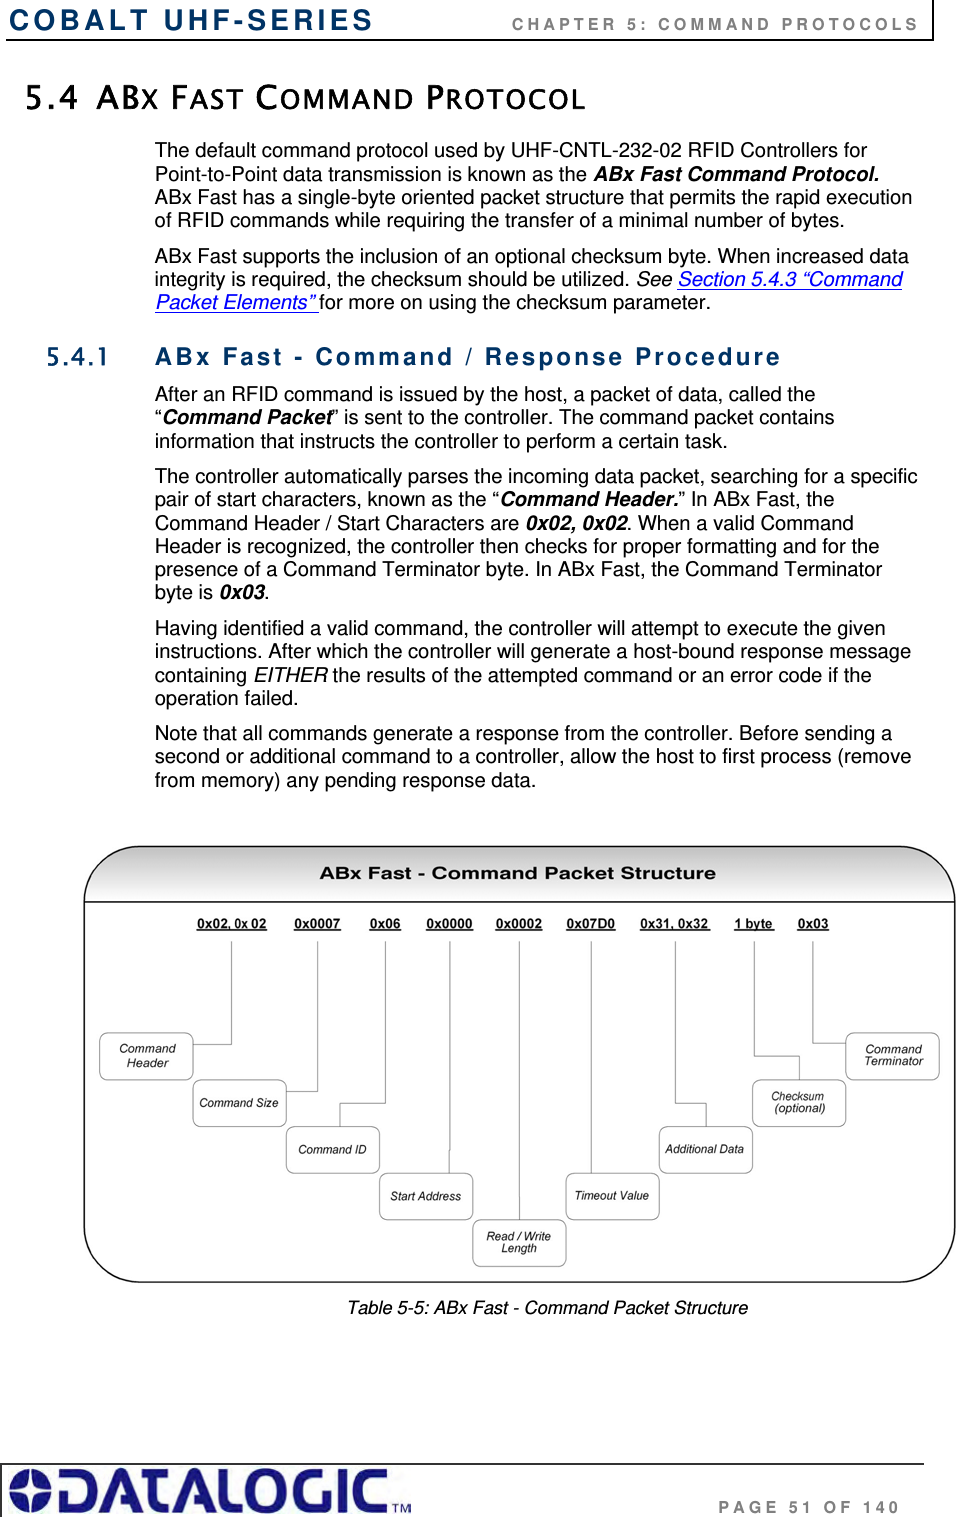 COBALT UHF-SERIES    CHAPTER 5: COMMAND PROTOCOLS                                     PAGE 51 OF 140 5.4 ABX FAST COMMAND PROTOCOL The default command protocol used by UHF-CNTL-232-02 RFID Controllers for Point-to-Point data transmission is known as the ABx Fast Command Protocol. ABx Fast has a single-byte oriented packet structure that permits the rapid execution of RFID commands while requiring the transfer of a minimal number of bytes.  ABx Fast supports the inclusion of an optional checksum byte. When increased data integrity is required, the checksum should be utilized. See Section 5.4.3 “Command Packet Elements” for more on using the checksum parameter. 5.4.1  ABx Fast - Command / Response Procedure After an RFID command is issued by the host, a packet of data, called the “Command Packet” is sent to the controller. The command packet contains information that instructs the controller to perform a certain task.  The controller automatically parses the incoming data packet, searching for a specific pair of start characters, known as the “Command Header.” In ABx Fast, the Command Header / Start Characters are 0x02, 0x02. When a valid Command Header is recognized, the controller then checks for proper formatting and for the presence of a Command Terminator byte. In ABx Fast, the Command Terminator byte is 0x03. Having identified a valid command, the controller will attempt to execute the given instructions. After which the controller will generate a host-bound response message containing EITHER the results of the attempted command or an error code if the operation failed.  Note that all commands generate a response from the controller. Before sending a second or additional command to a controller, allow the host to first process (remove from memory) any pending response data.   Table 5-5: ABx Fast - Command Packet Structure   